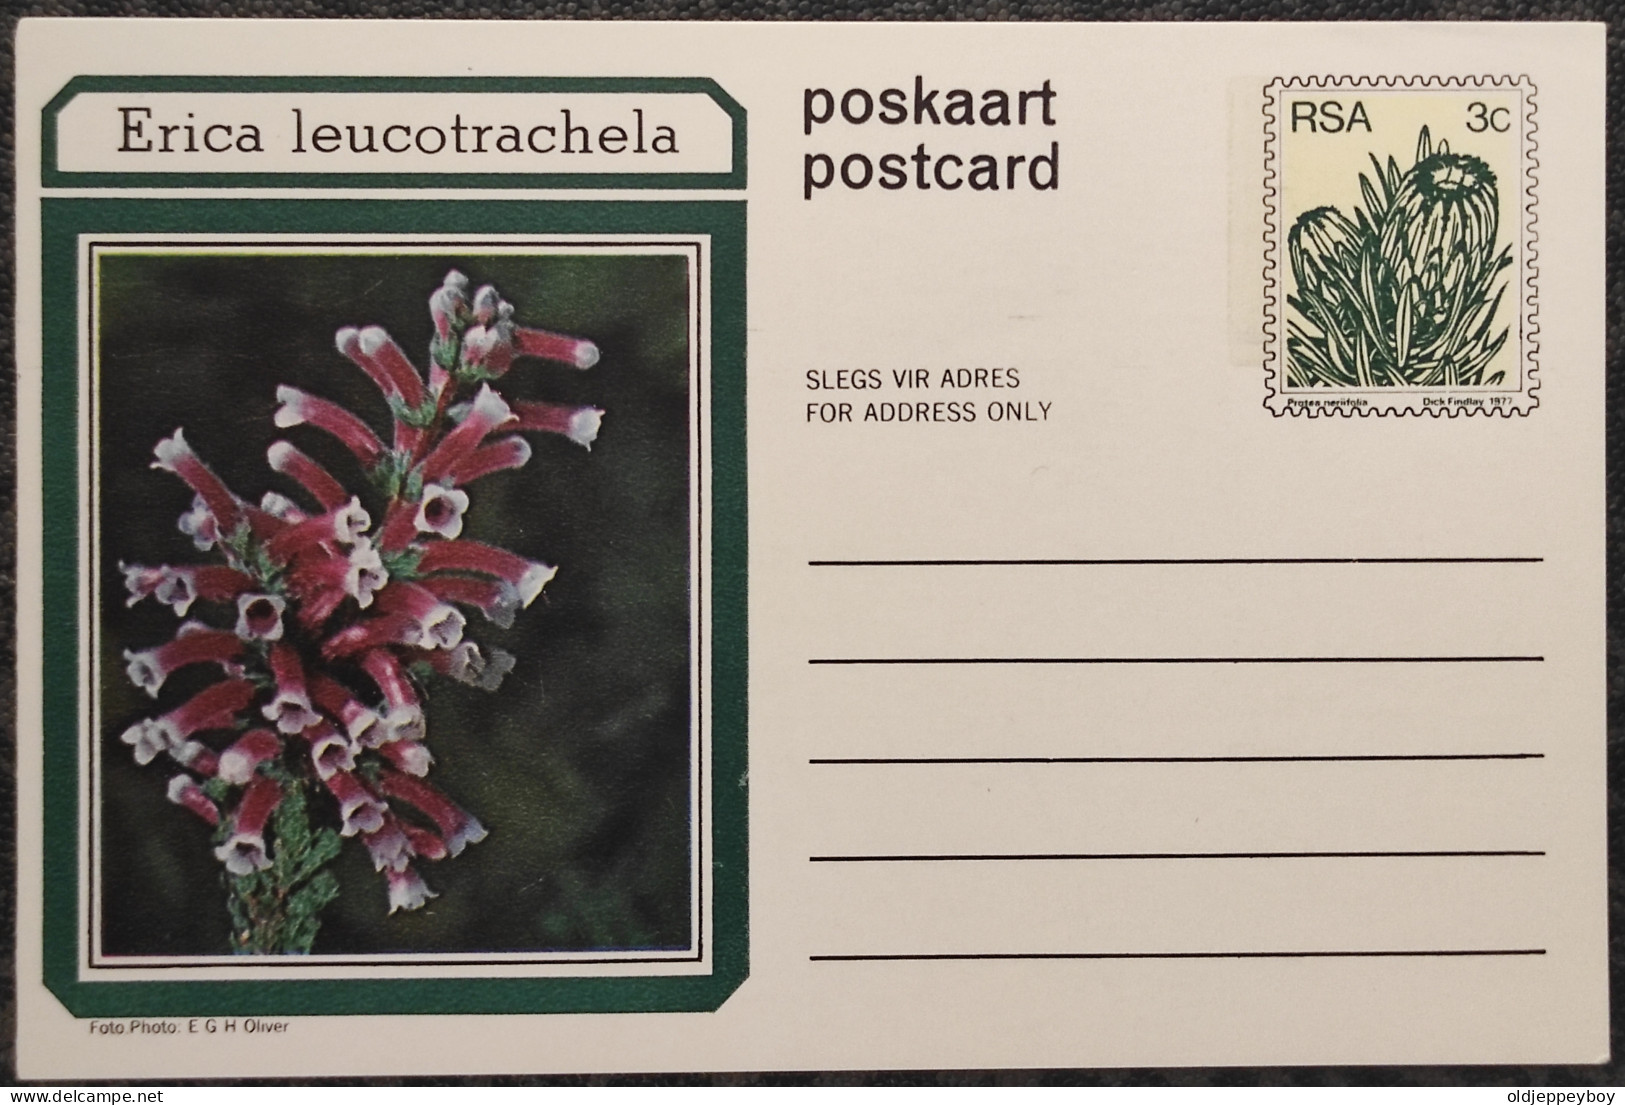 3c SOUTH AFRICA Postal STATIONERY CARD Illus ERICA Leucotrachela FLOWER Cover Stamps Flowers Rsa - Covers & Documents